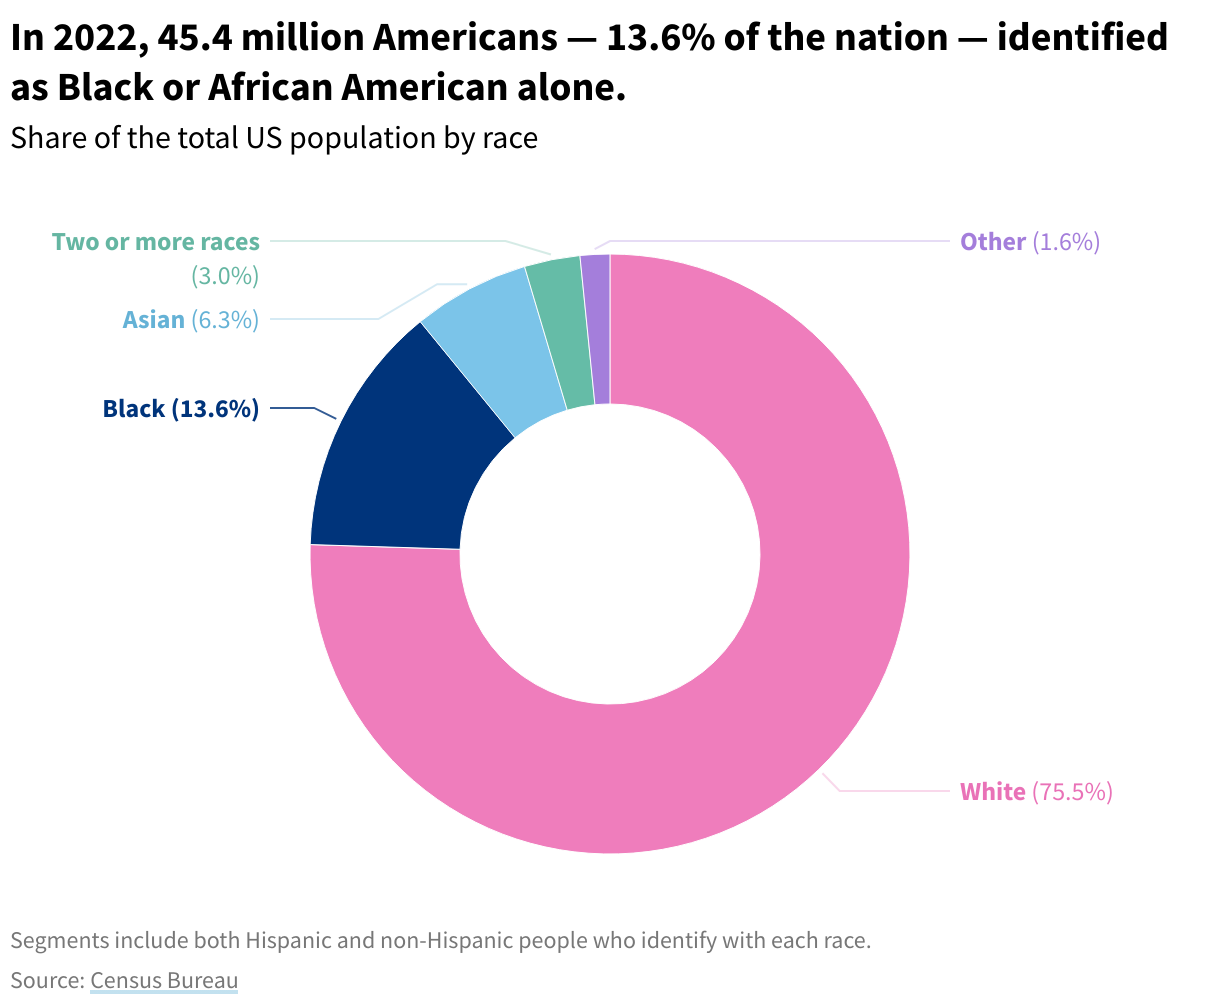 A donut chart showing the share of the total US population by race in 2022. 13.6% of the country identified as Black.